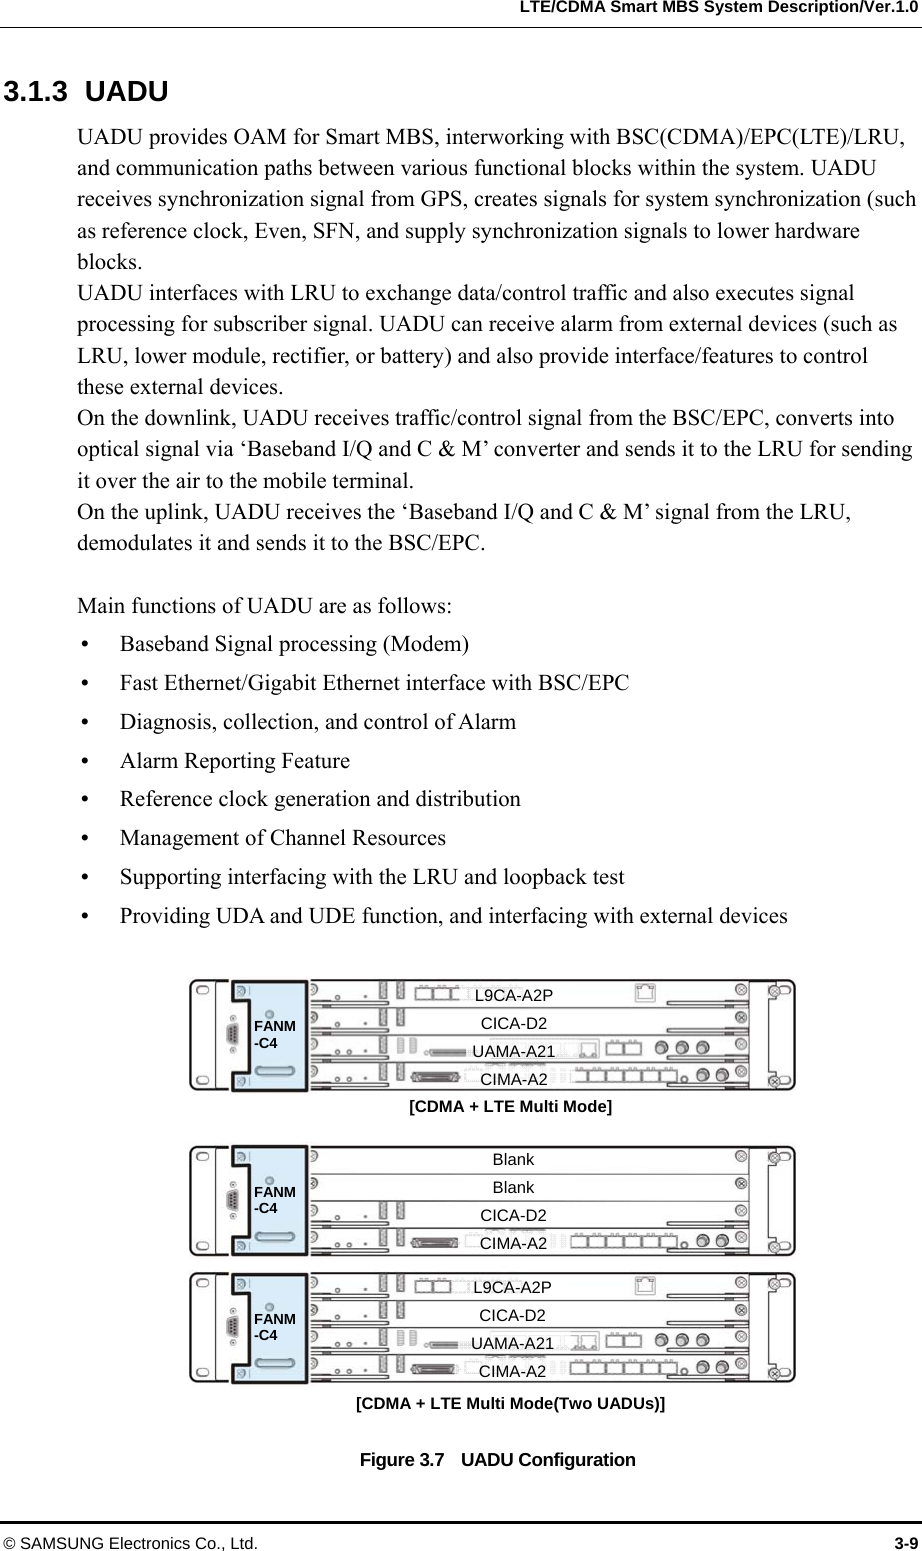   LTE/CDMA Smart MBS System Description/Ver.1.0 © SAMSUNG Electronics Co., Ltd.  3-9 3.1.3 UADU UADU provides OAM for Smart MBS, interworking with BSC(CDMA)/EPC(LTE)/LRU, and communication paths between various functional blocks within the system. UADU receives synchronization signal from GPS, creates signals for system synchronization (such as reference clock, Even, SFN, and supply synchronization signals to lower hardware blocks. UADU interfaces with LRU to exchange data/control traffic and also executes signal processing for subscriber signal. UADU can receive alarm from external devices (such as LRU, lower module, rectifier, or battery) and also provide interface/features to control these external devices. On the downlink, UADU receives traffic/control signal from the BSC/EPC, converts into optical signal via ‘Baseband I/Q and C &amp; M’ converter and sends it to the LRU for sending it over the air to the mobile terminal.   On the uplink, UADU receives the ‘Baseband I/Q and C &amp; M’ signal from the LRU, demodulates it and sends it to the BSC/EPC.  Main functions of UADU are as follows:  Baseband Signal processing (Modem)  Fast Ethernet/Gigabit Ethernet interface with BSC/EPC  Diagnosis, collection, and control of Alarm  Alarm Reporting Feature  Reference clock generation and distribution  Management of Channel Resources  Supporting interfacing with the LRU and loopback test  Providing UDA and UDE function, and interfacing with external devices  Figure 3.7    UADU Configuration FANM -C4 FANM -C4 [CDMA + LTE Multi Mode(Two UADUs)] FANM -C4 [CDMA + LTE Multi Mode] L9CA-A2P CICA-D2 UAMA-A21 CIMA-A2 Blank Blank CICA-D2 CIMA-A2 L9CA-A2P CICA-D2 UAMA-A21 CIMA-A2 